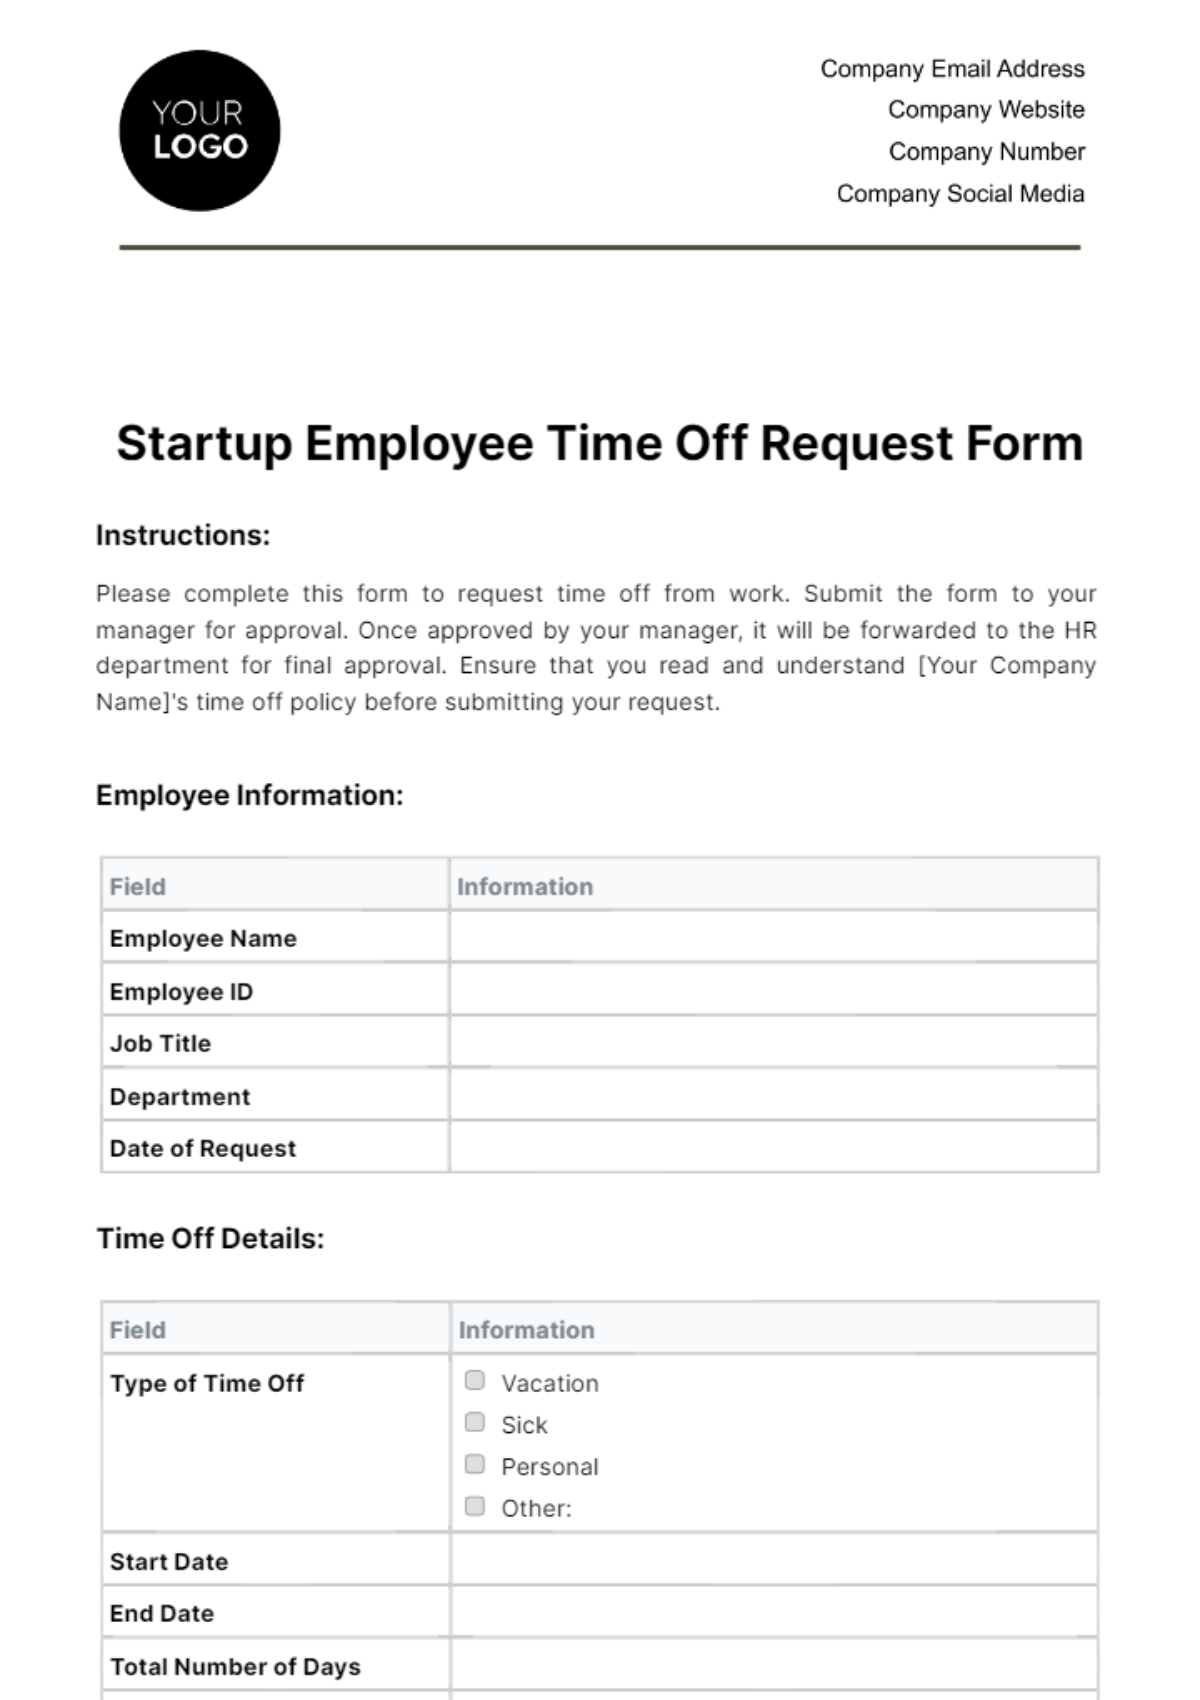 Startup Employee Time Off Request Form Template